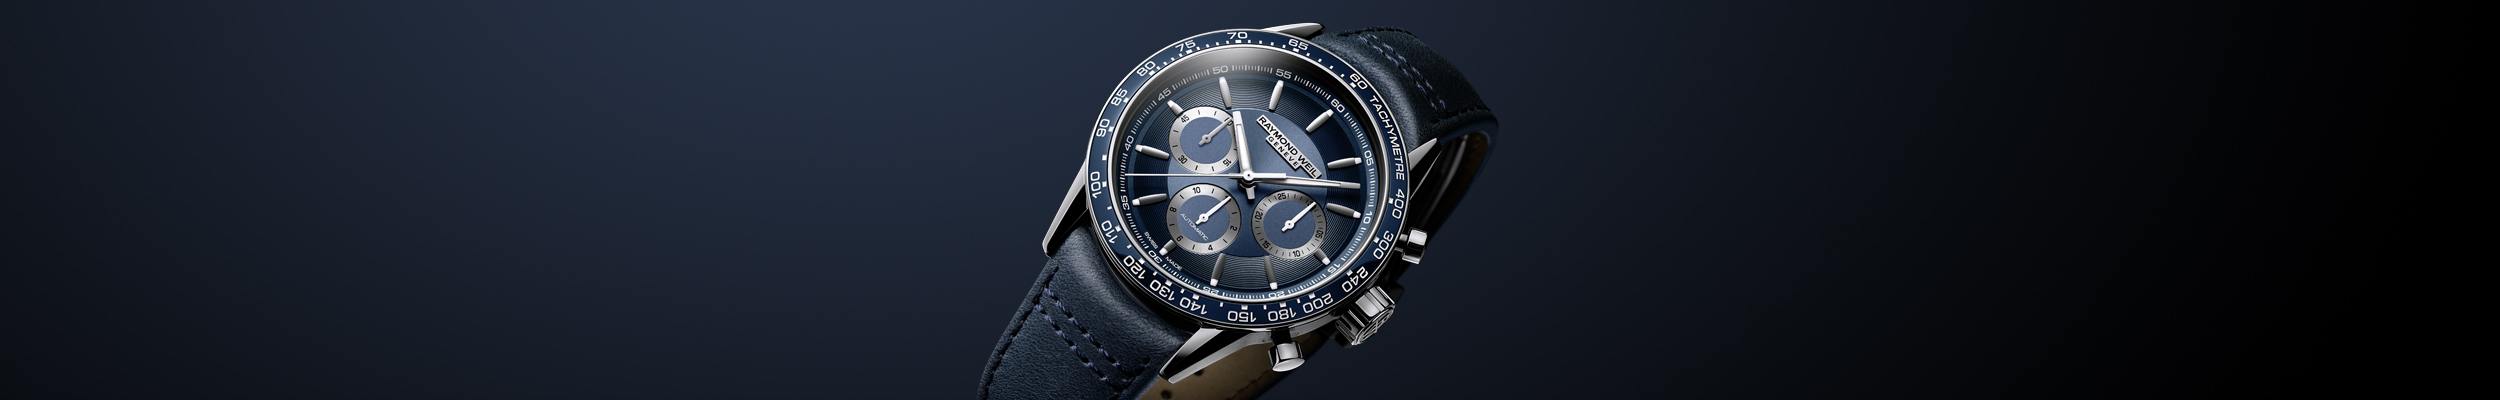 Banner image for Chronograph Watches page